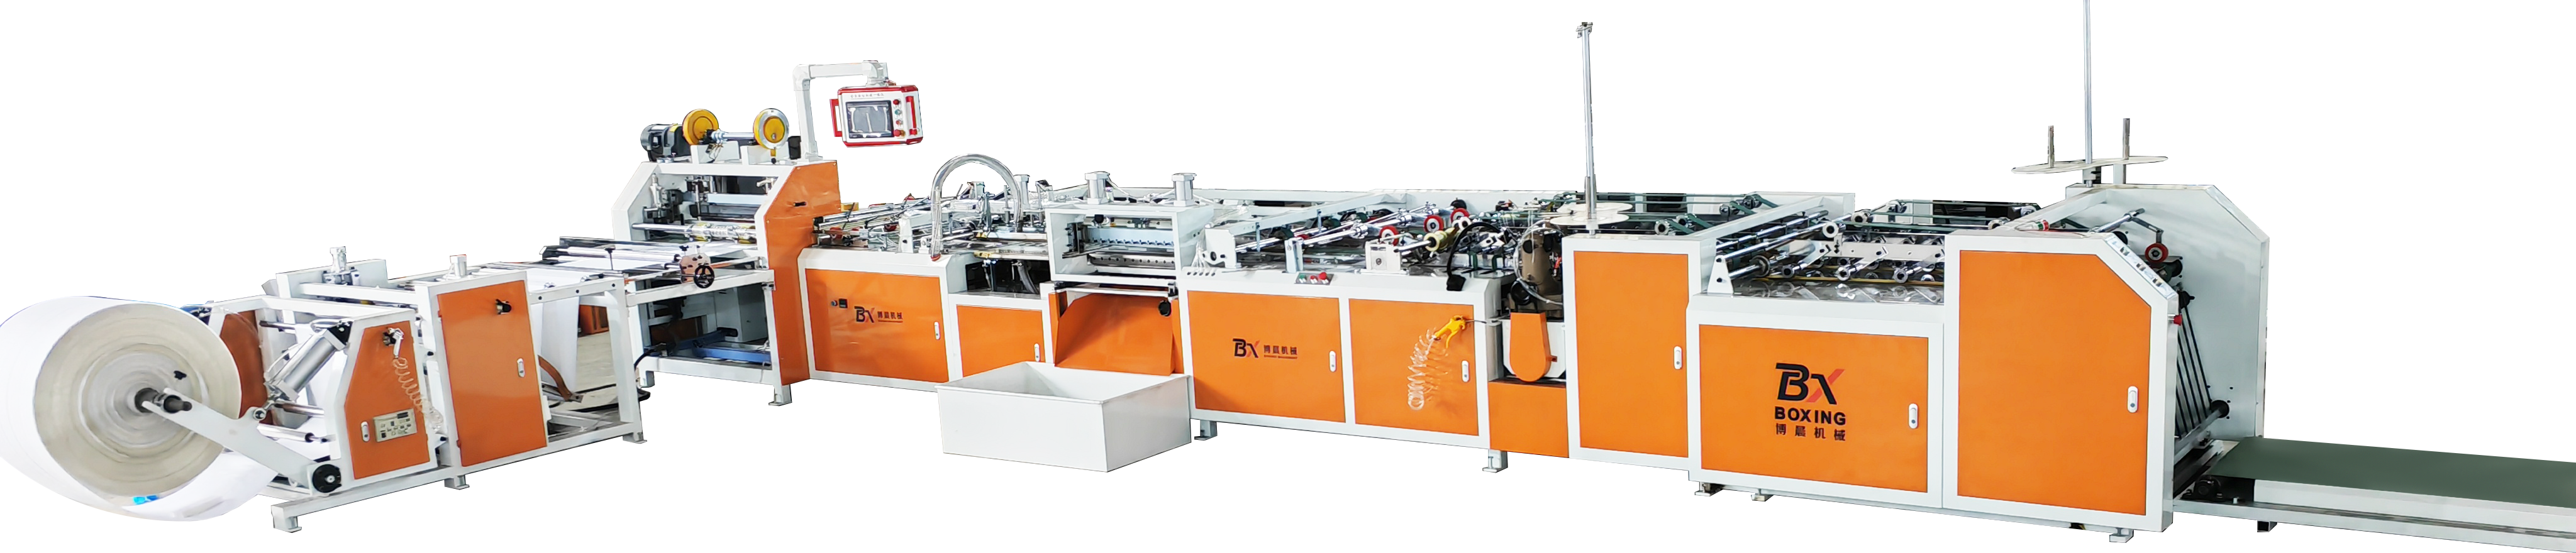 Automated Cutting & Sewing Developments | Textile World